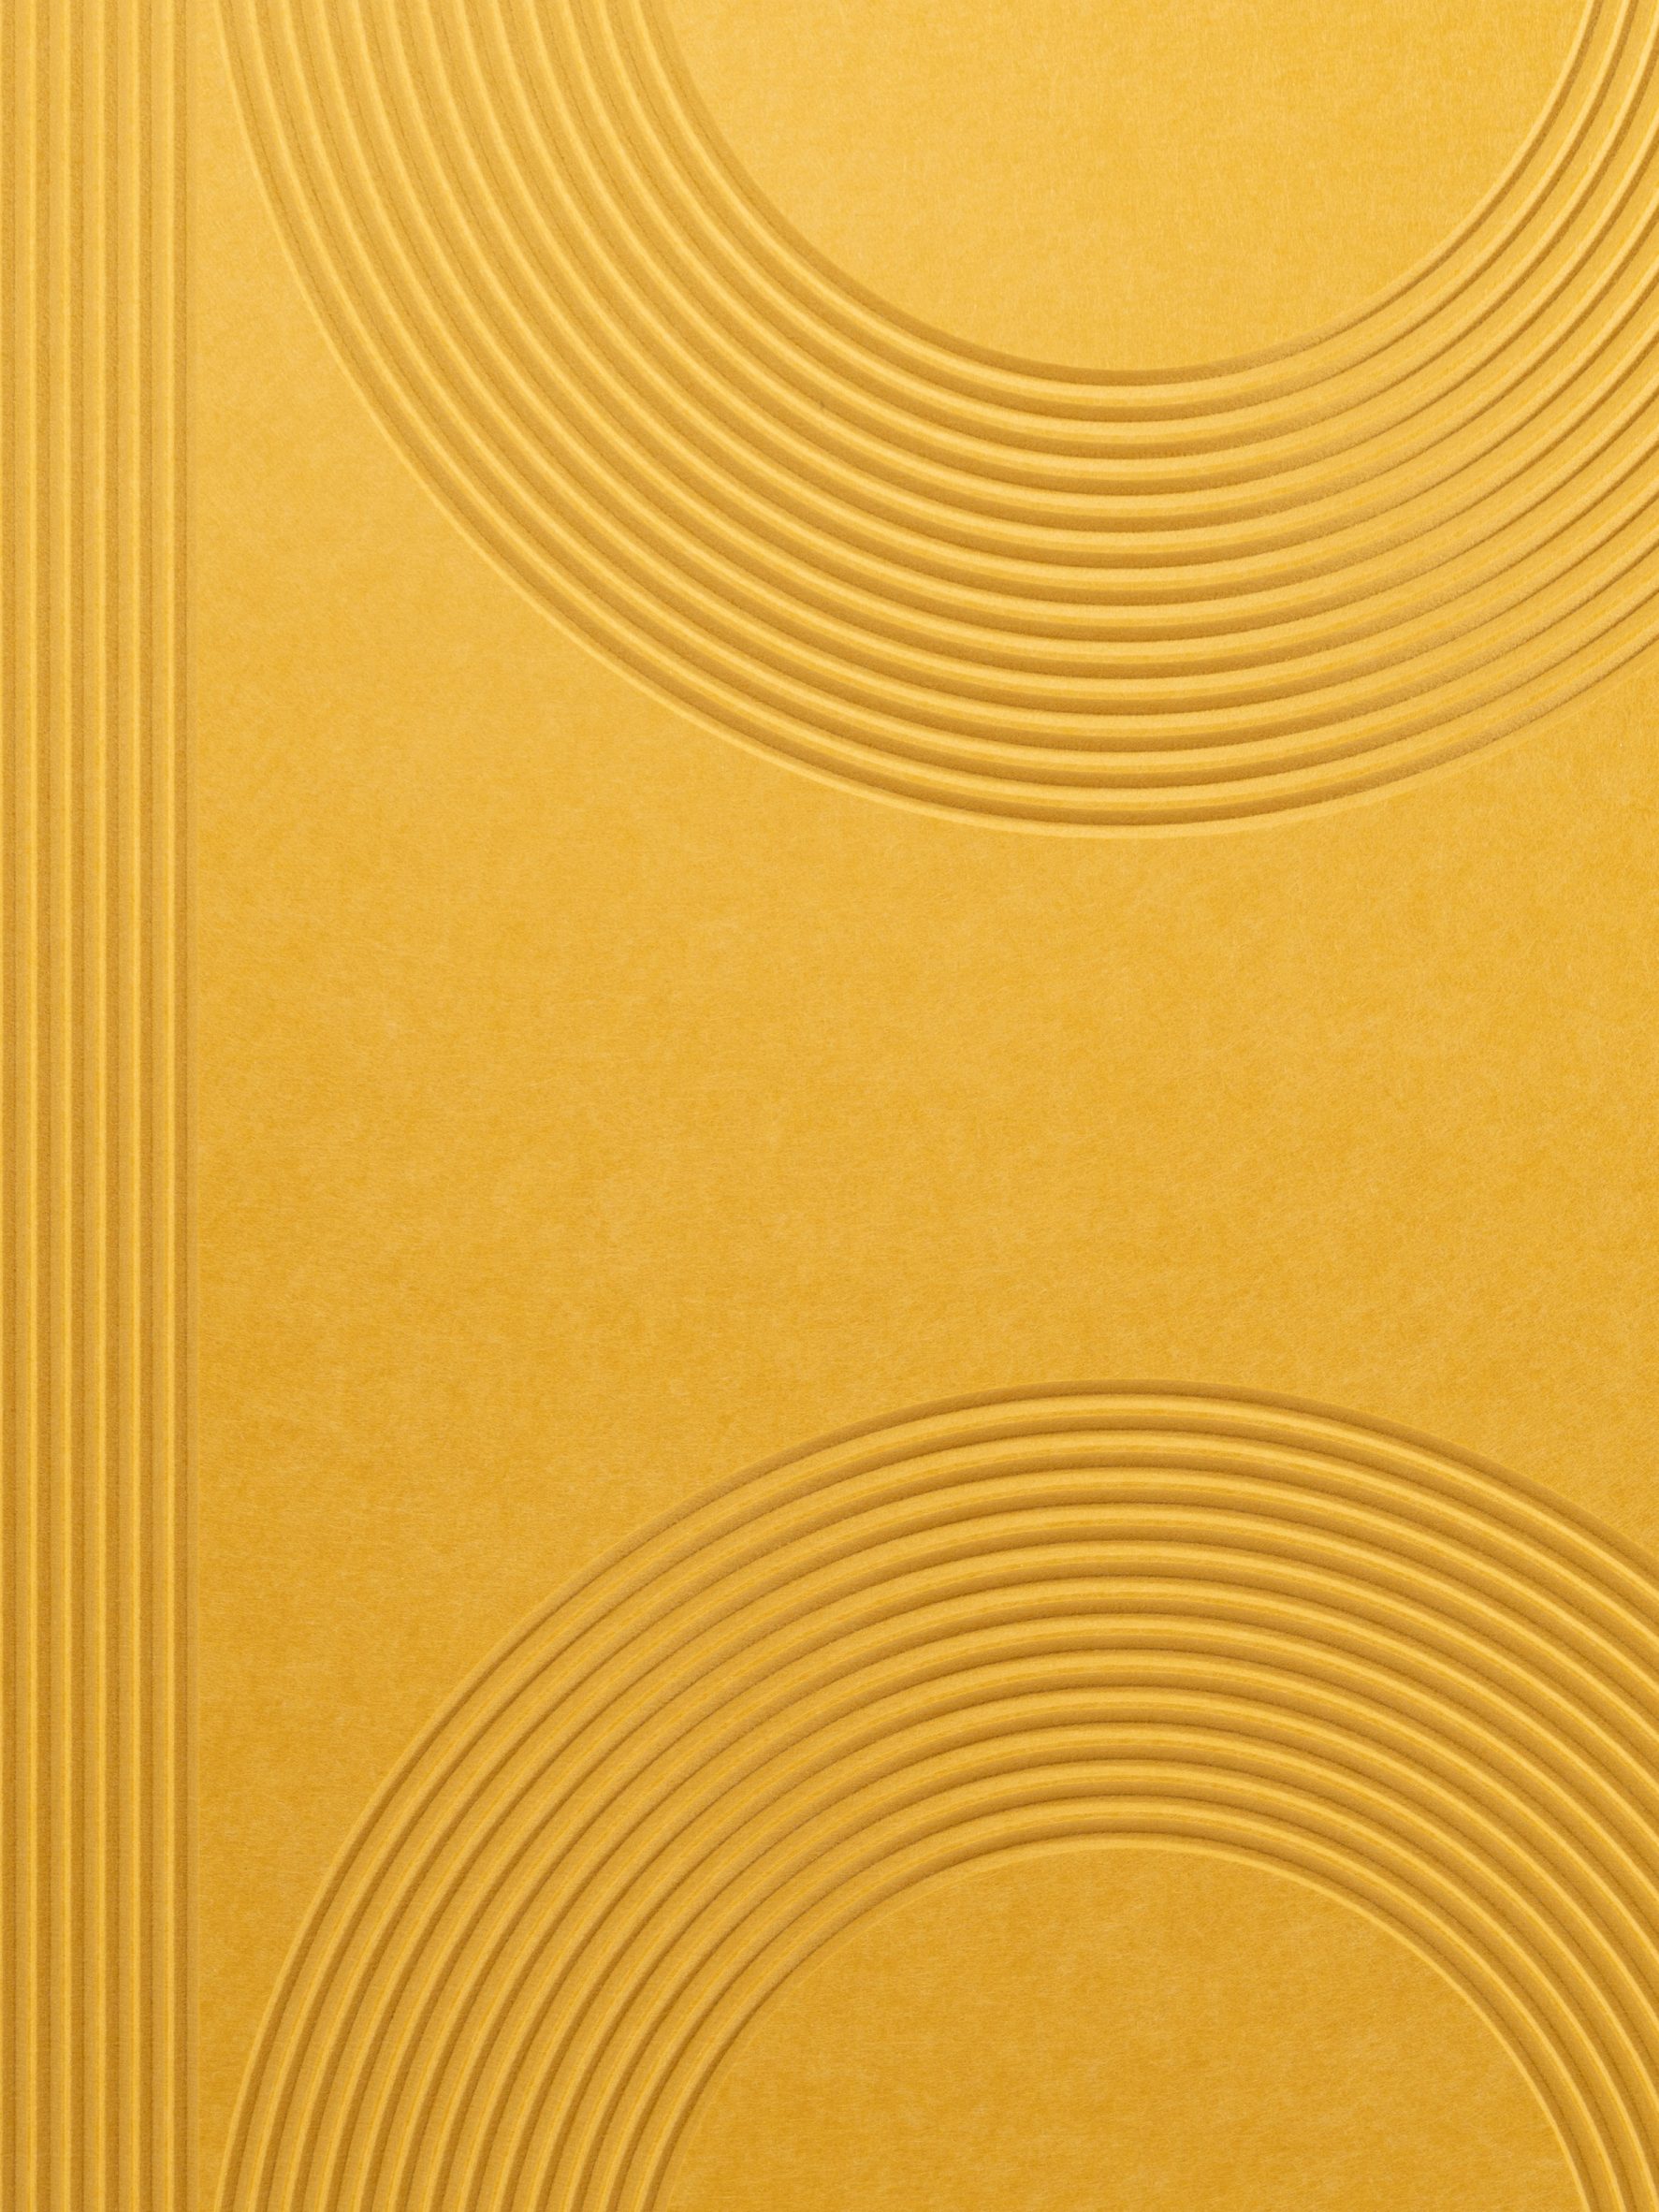 Close-up of acoustic panel in a yellow hue